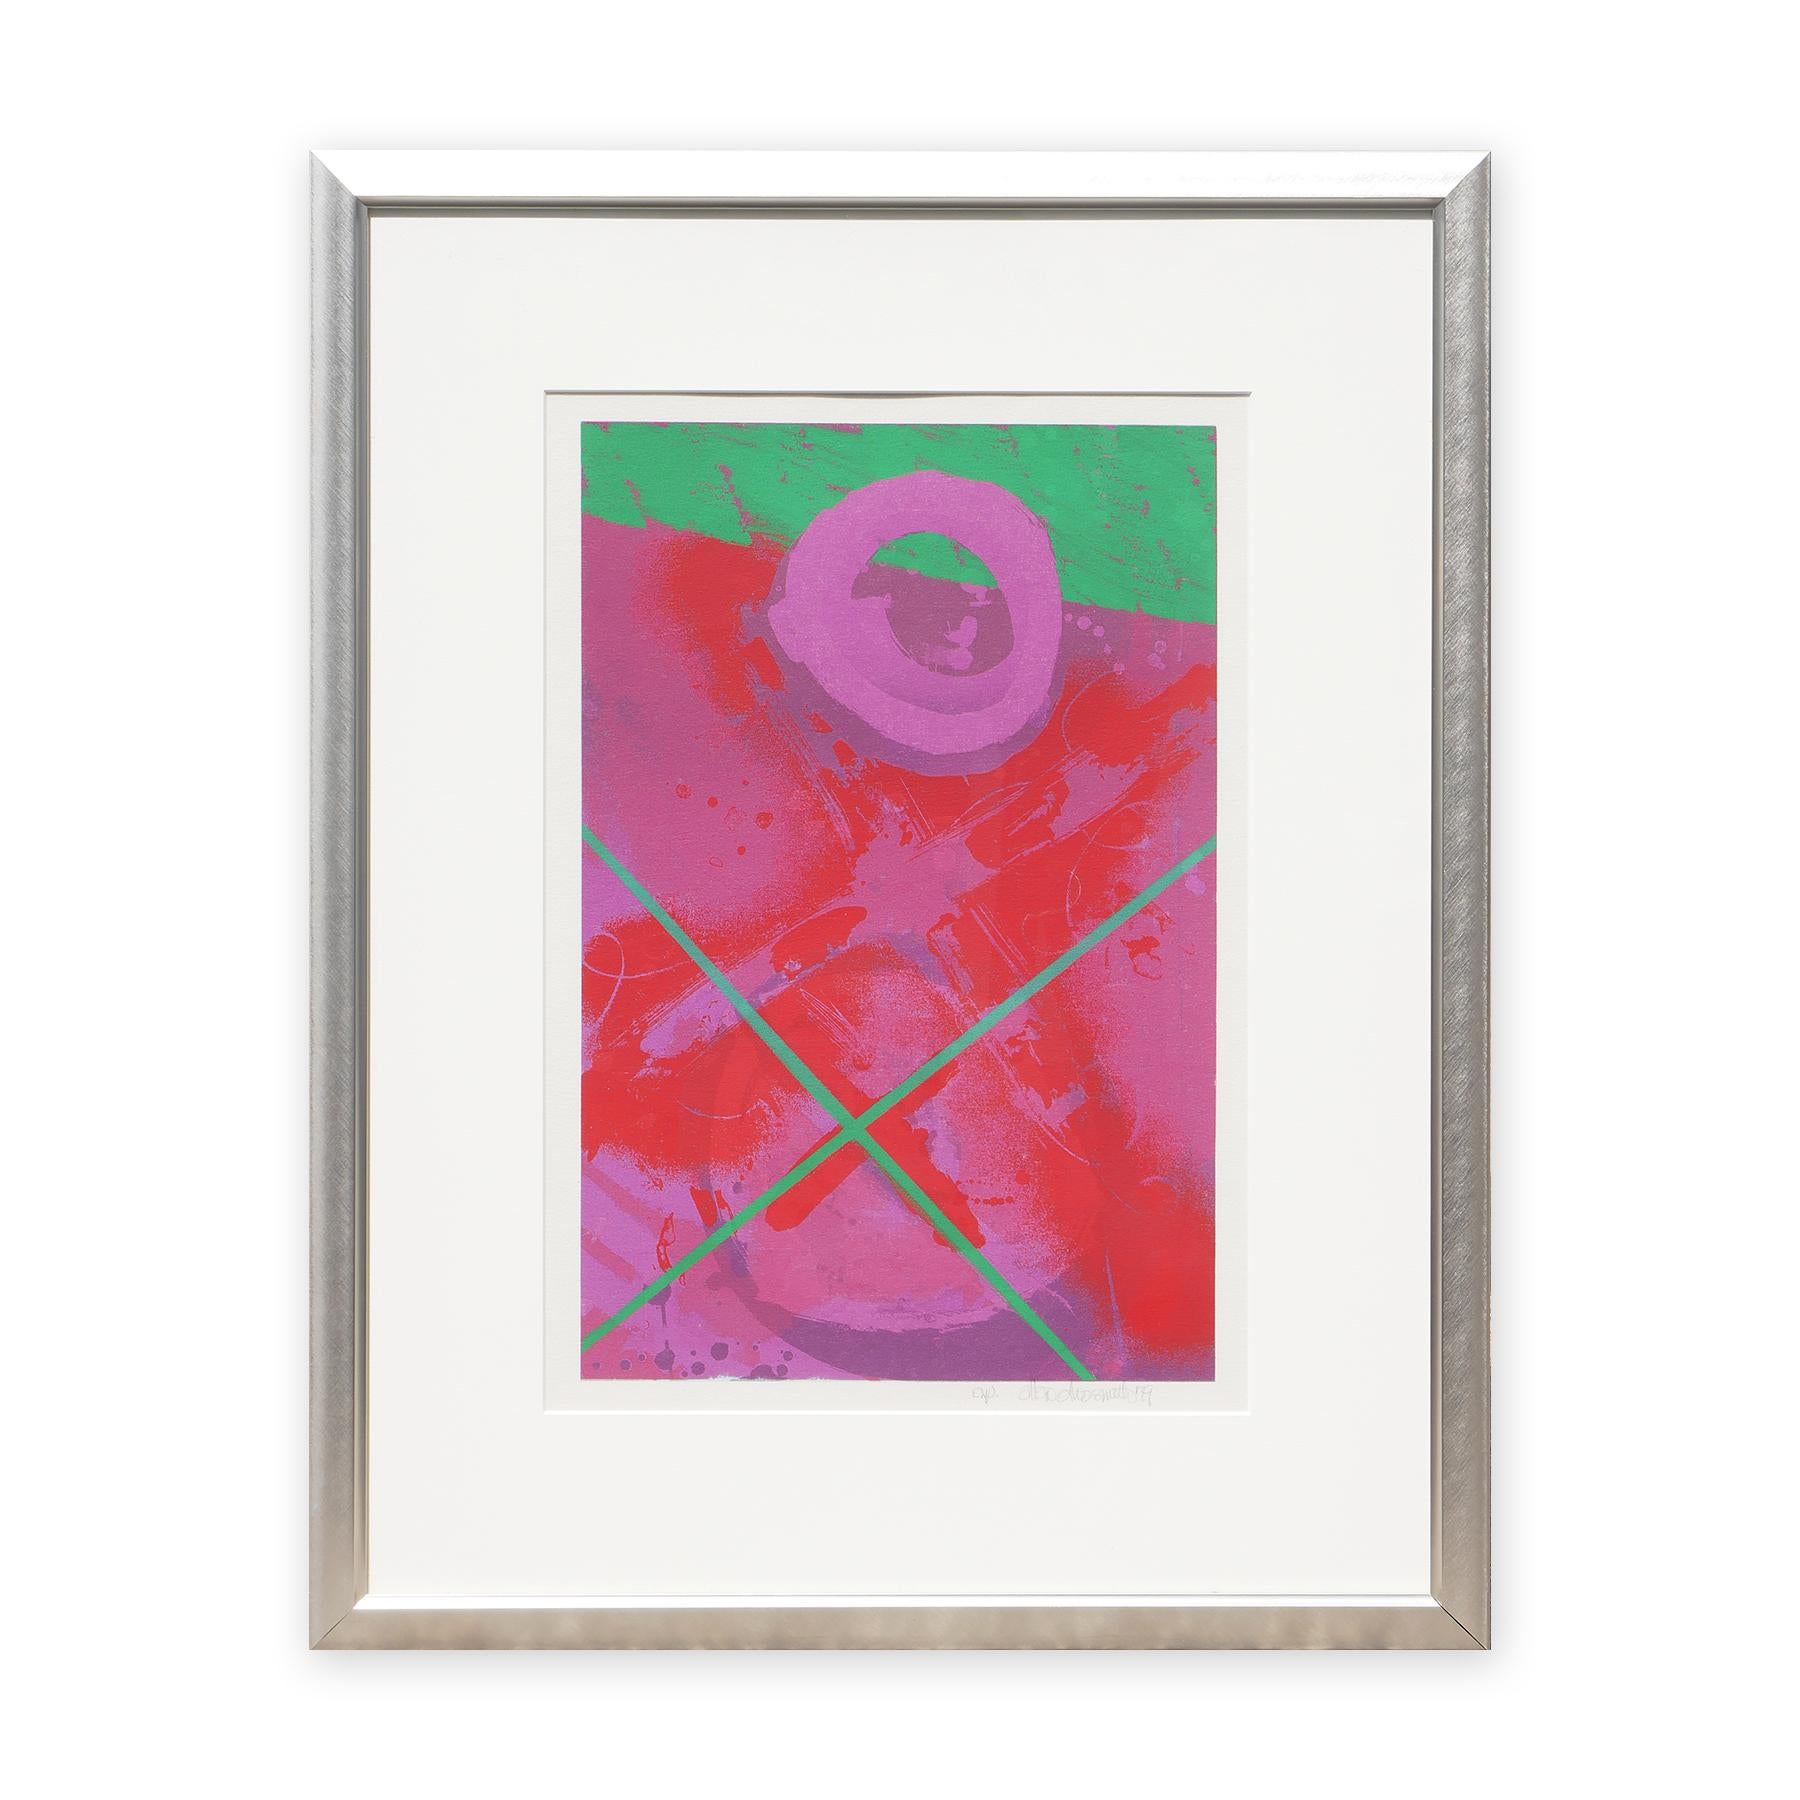 Colorful Modern Abstract Red, Pink, and Green Geometric Lithograph AP - Print by Allan Otho Smith